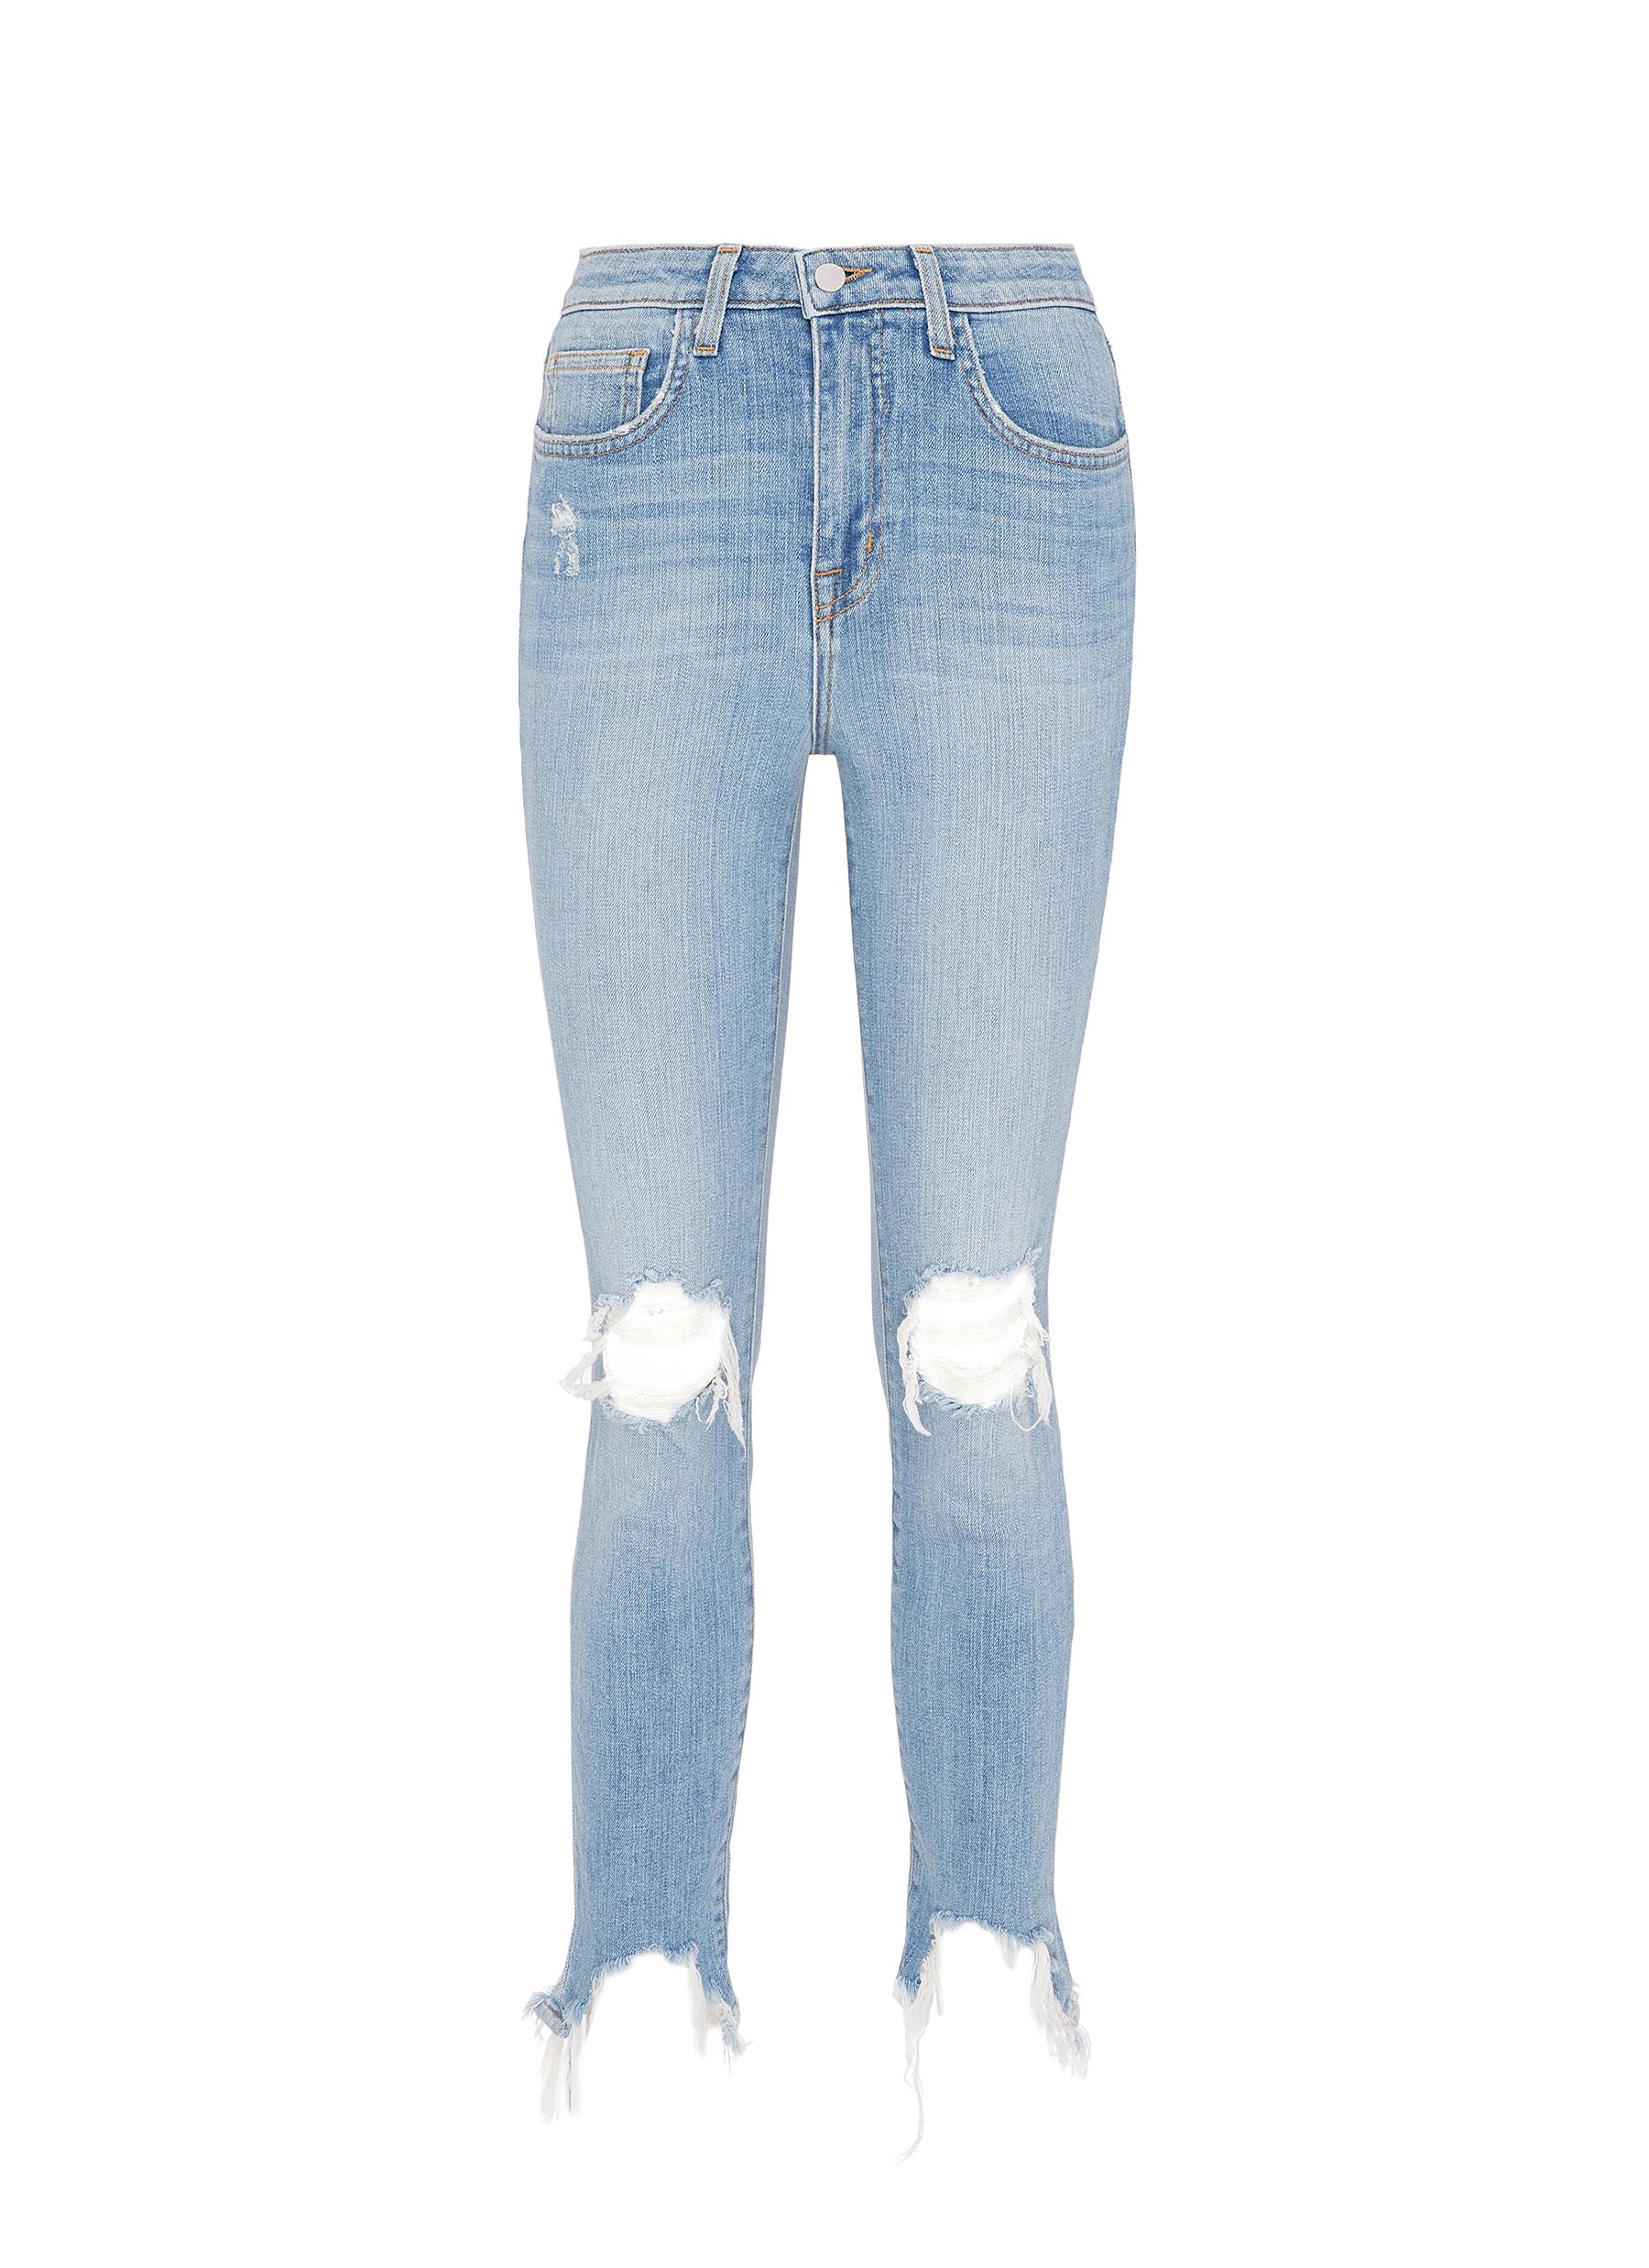 High Line ripped knee skinny jeans by L’Agence